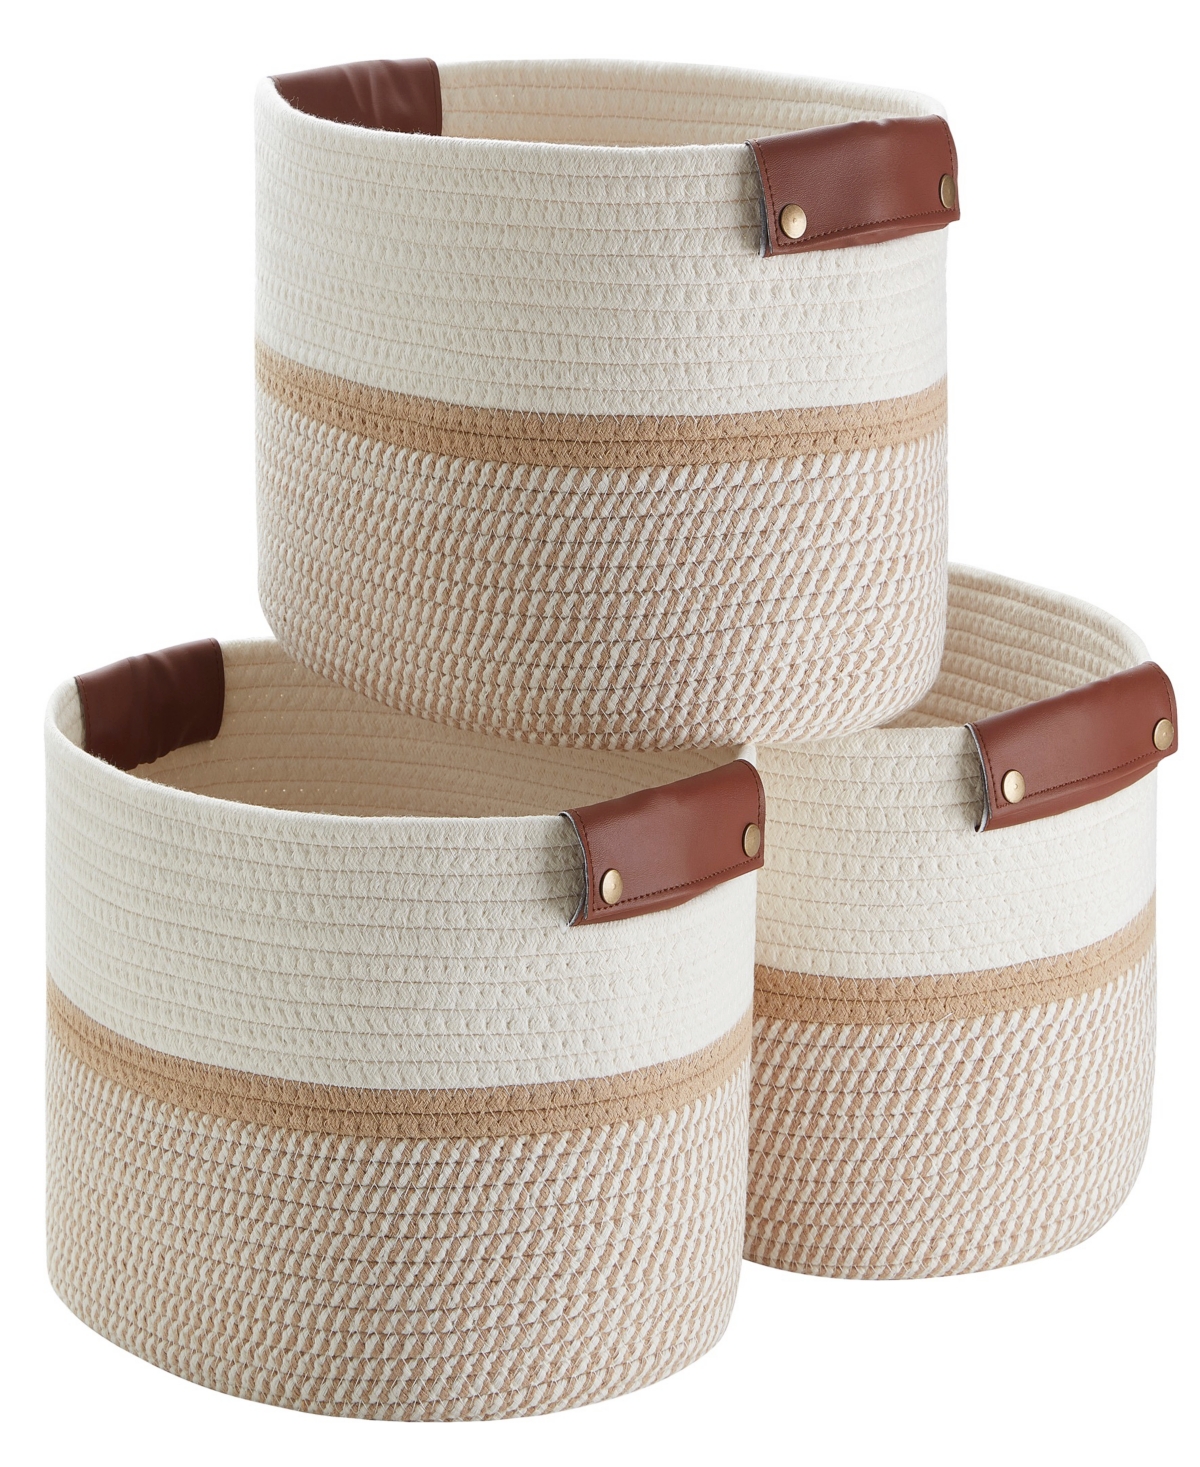 3 Pack Woven Cotton Rope Shelf Storage Basket with Leather Handles - White, Brown